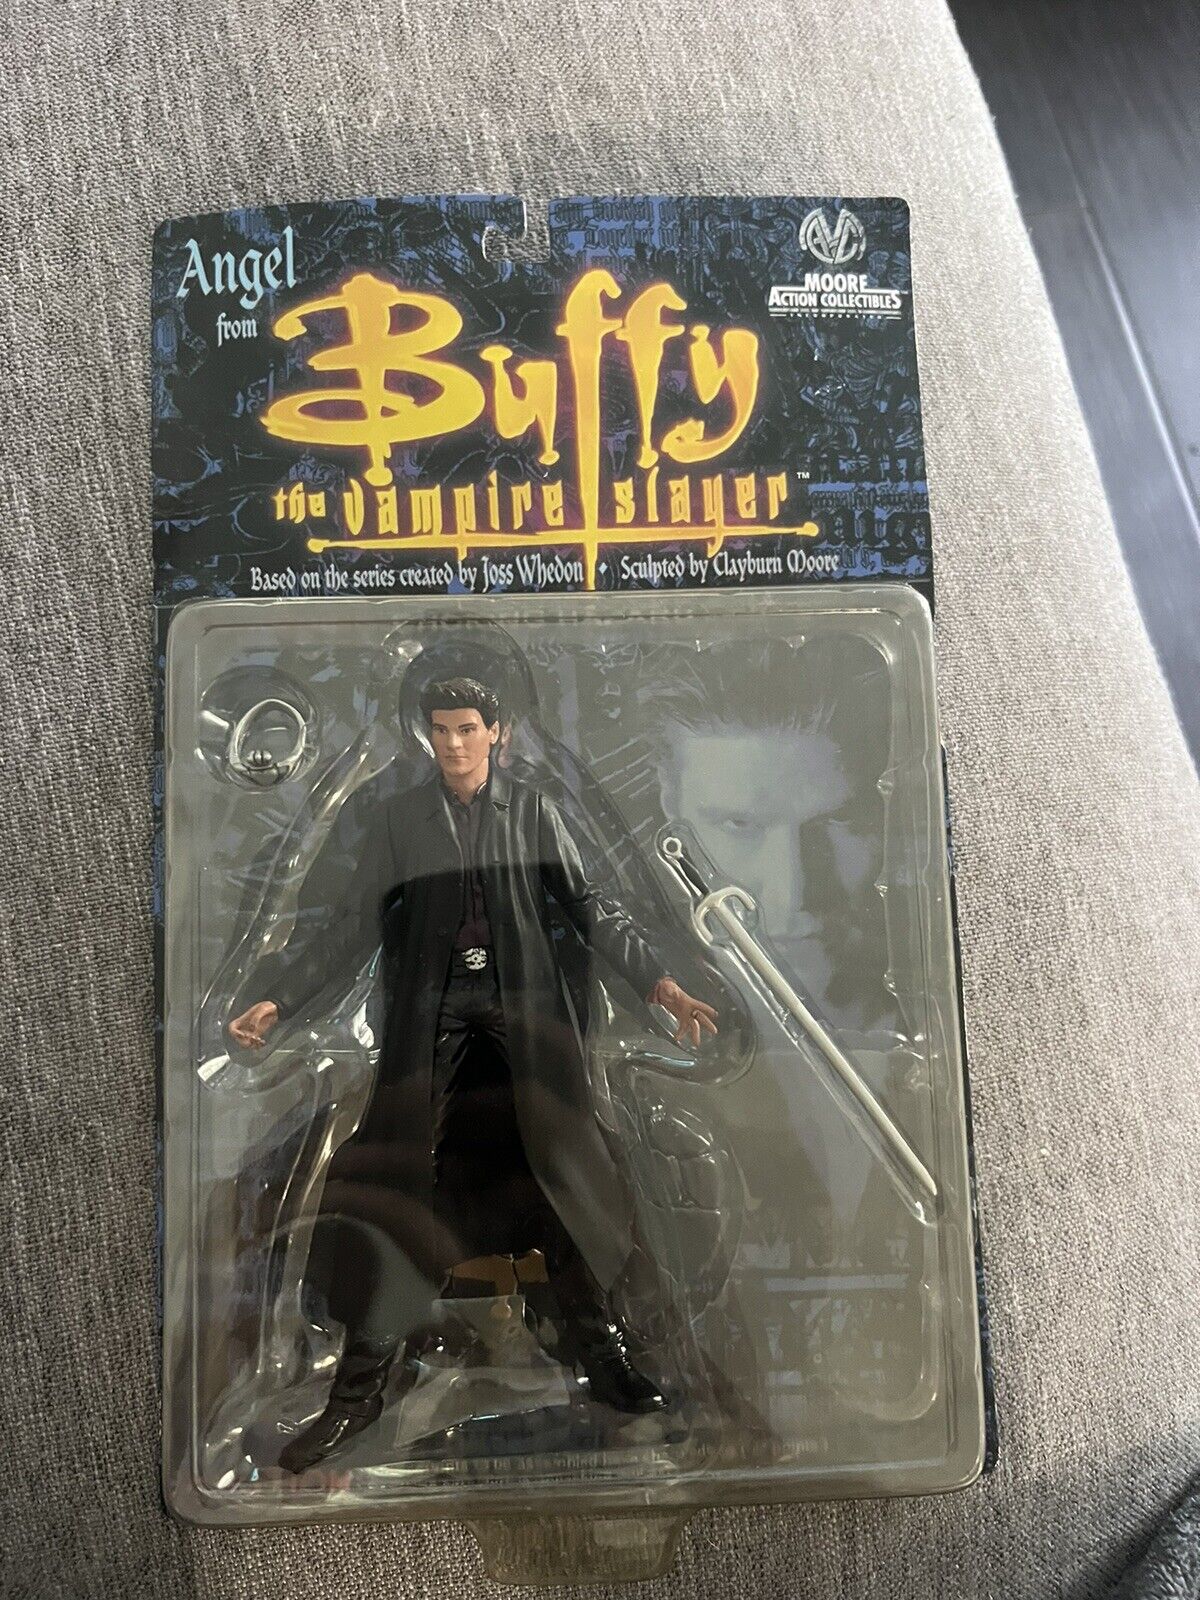 buffy the vampire slayer action figures Angel  (1999). “R”